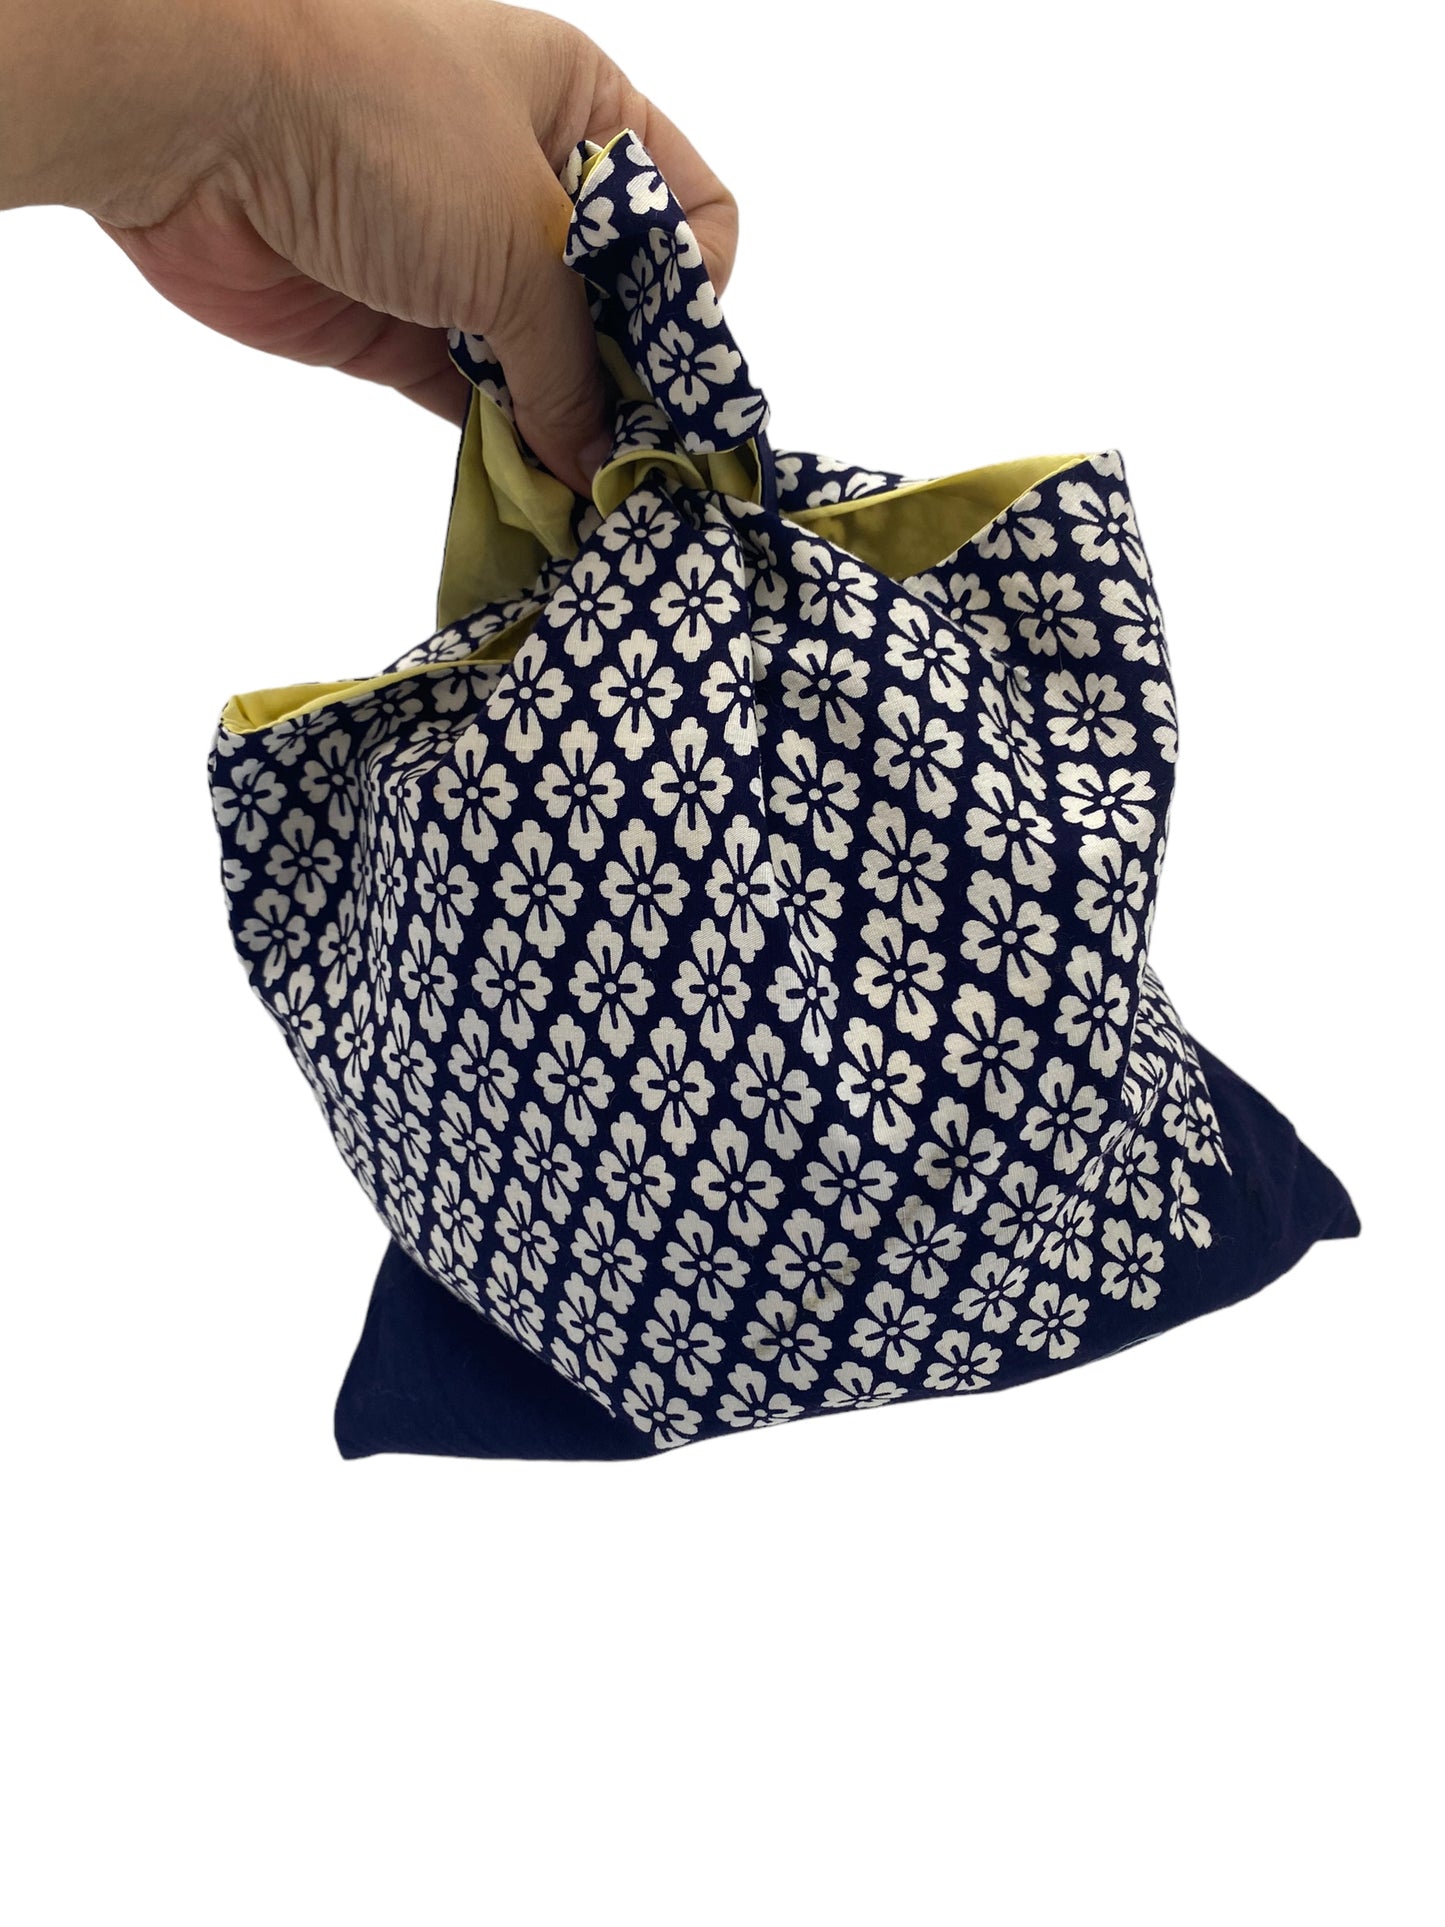 An idea bag that can also be used as a handbag by tying the top part using furoshiki cloth.